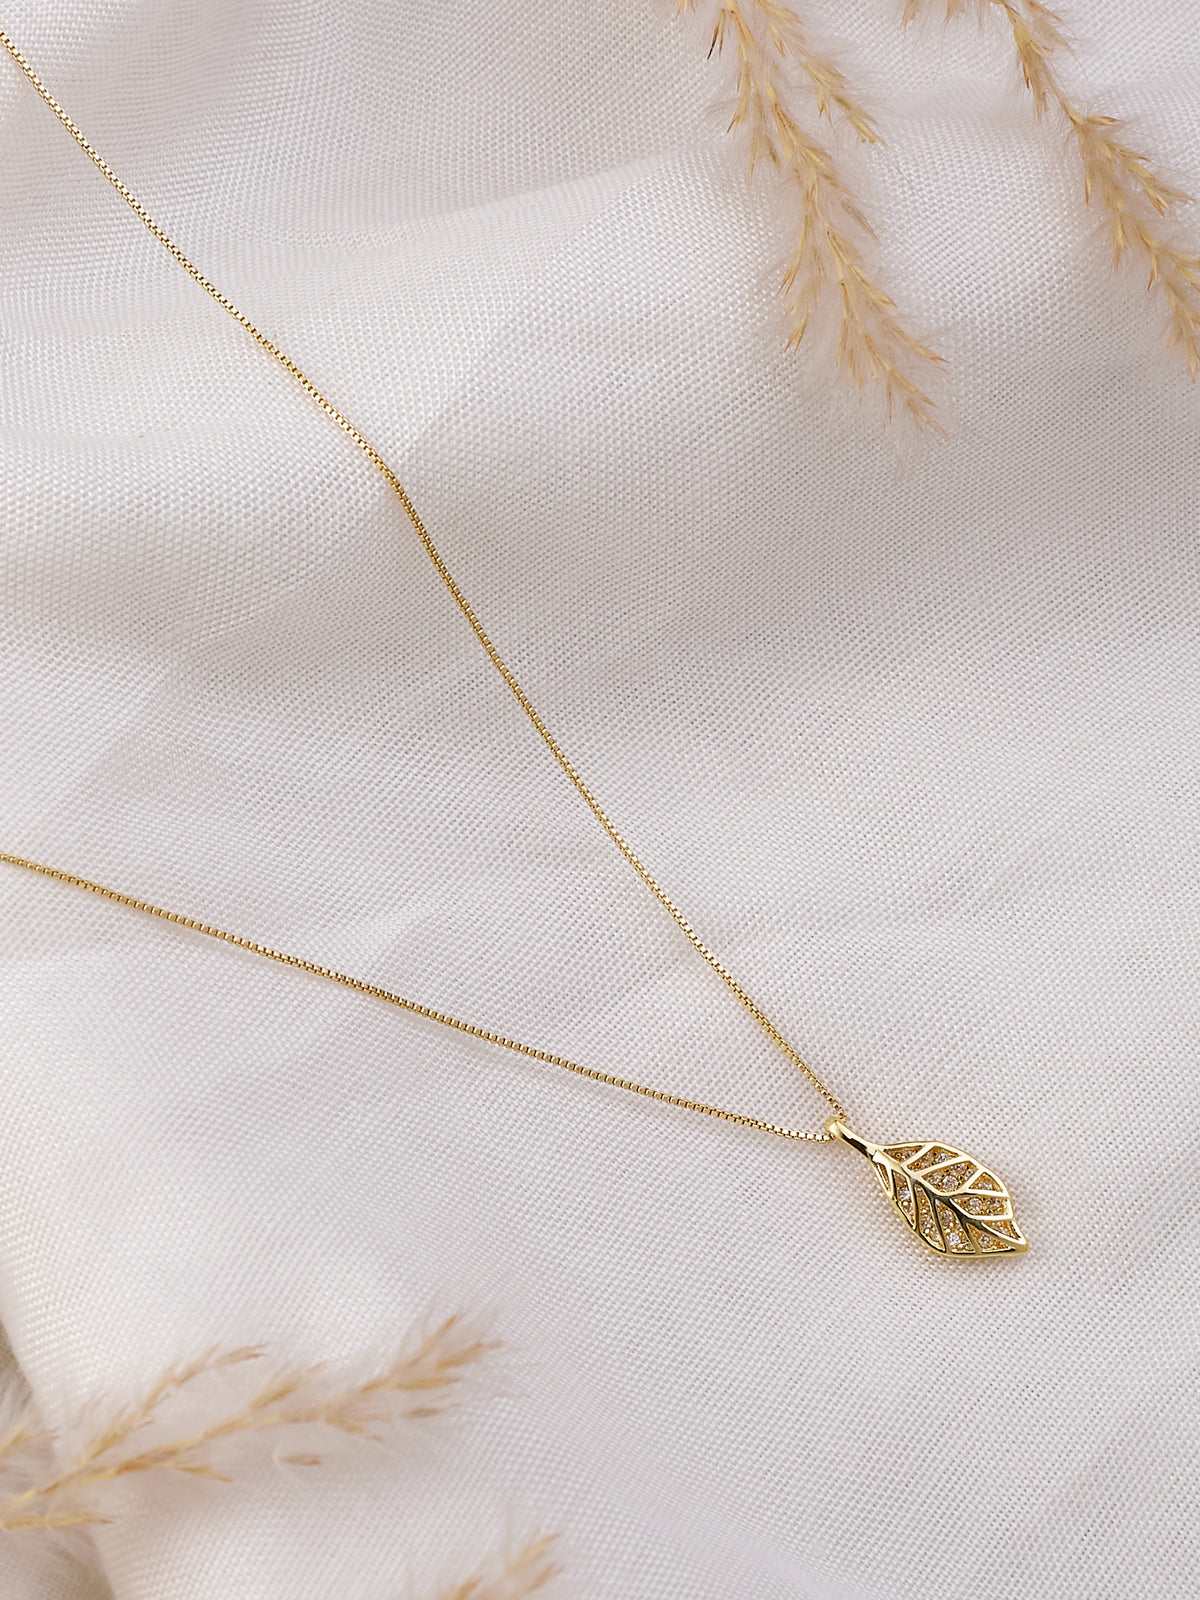 Gold-Plated Chain with Leave Design Pendant for women & girls